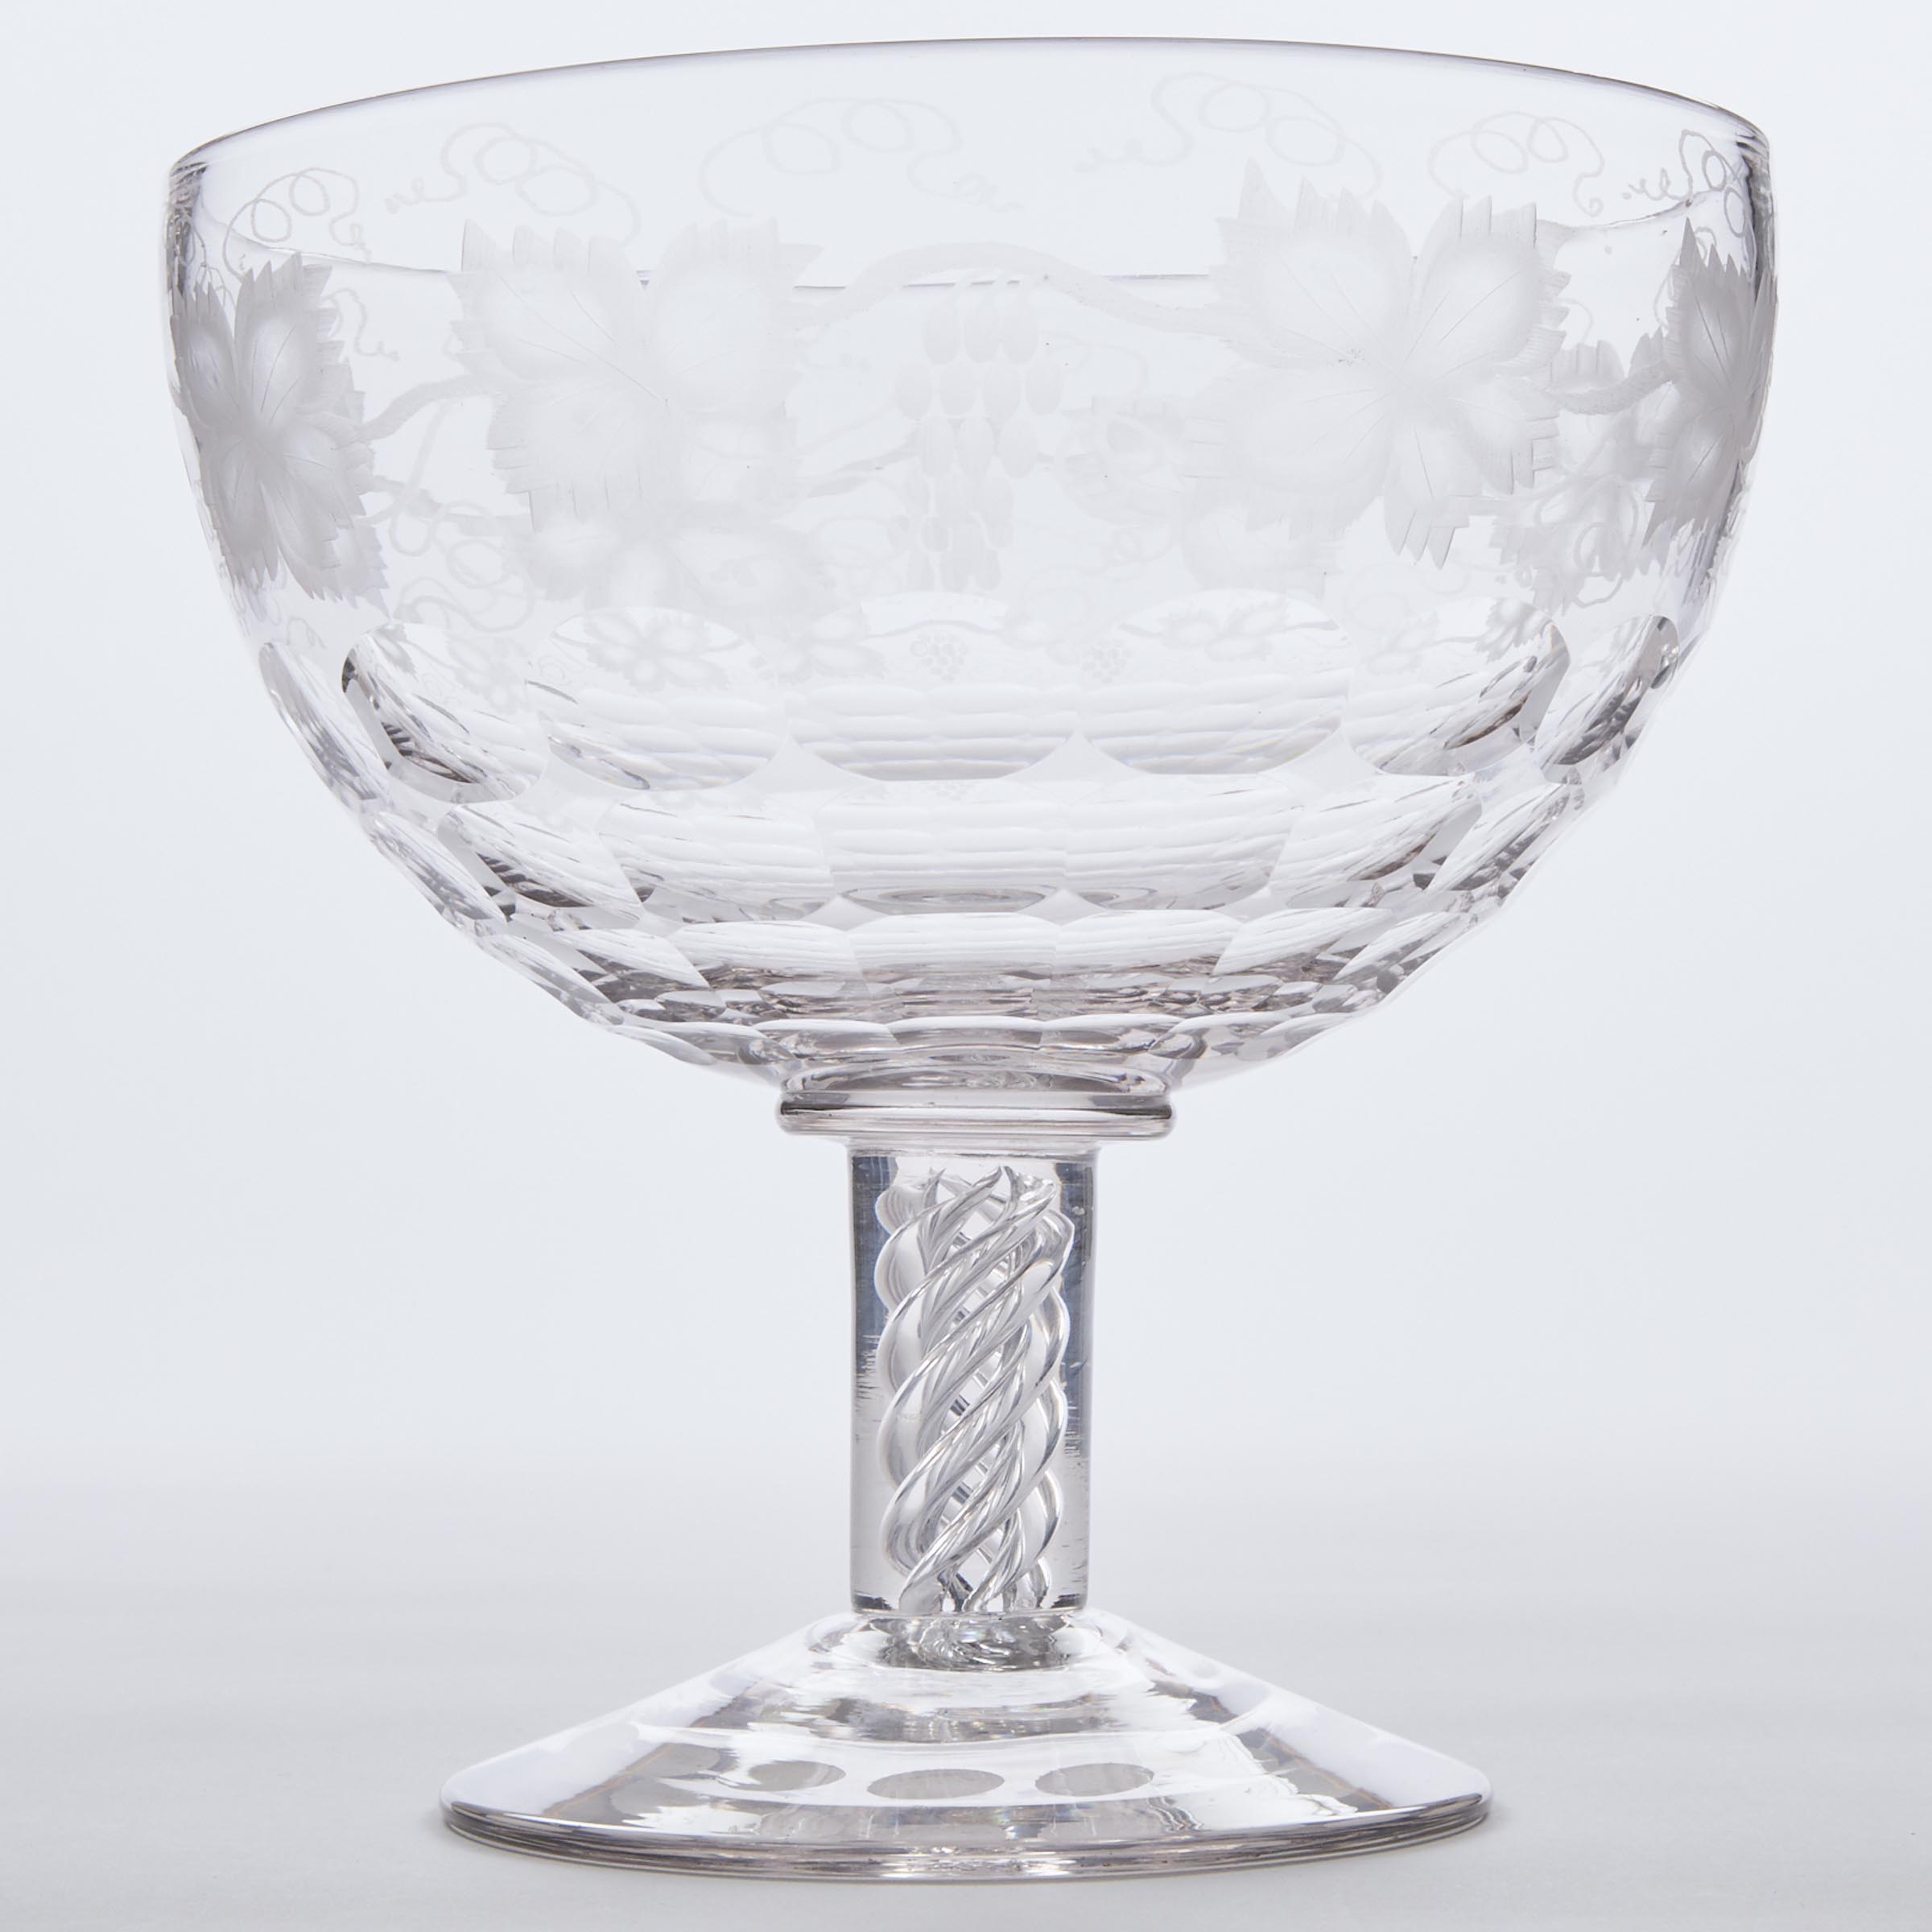 Continental Cut and Etched Glass Pedestal Footed Bowl, 19th century